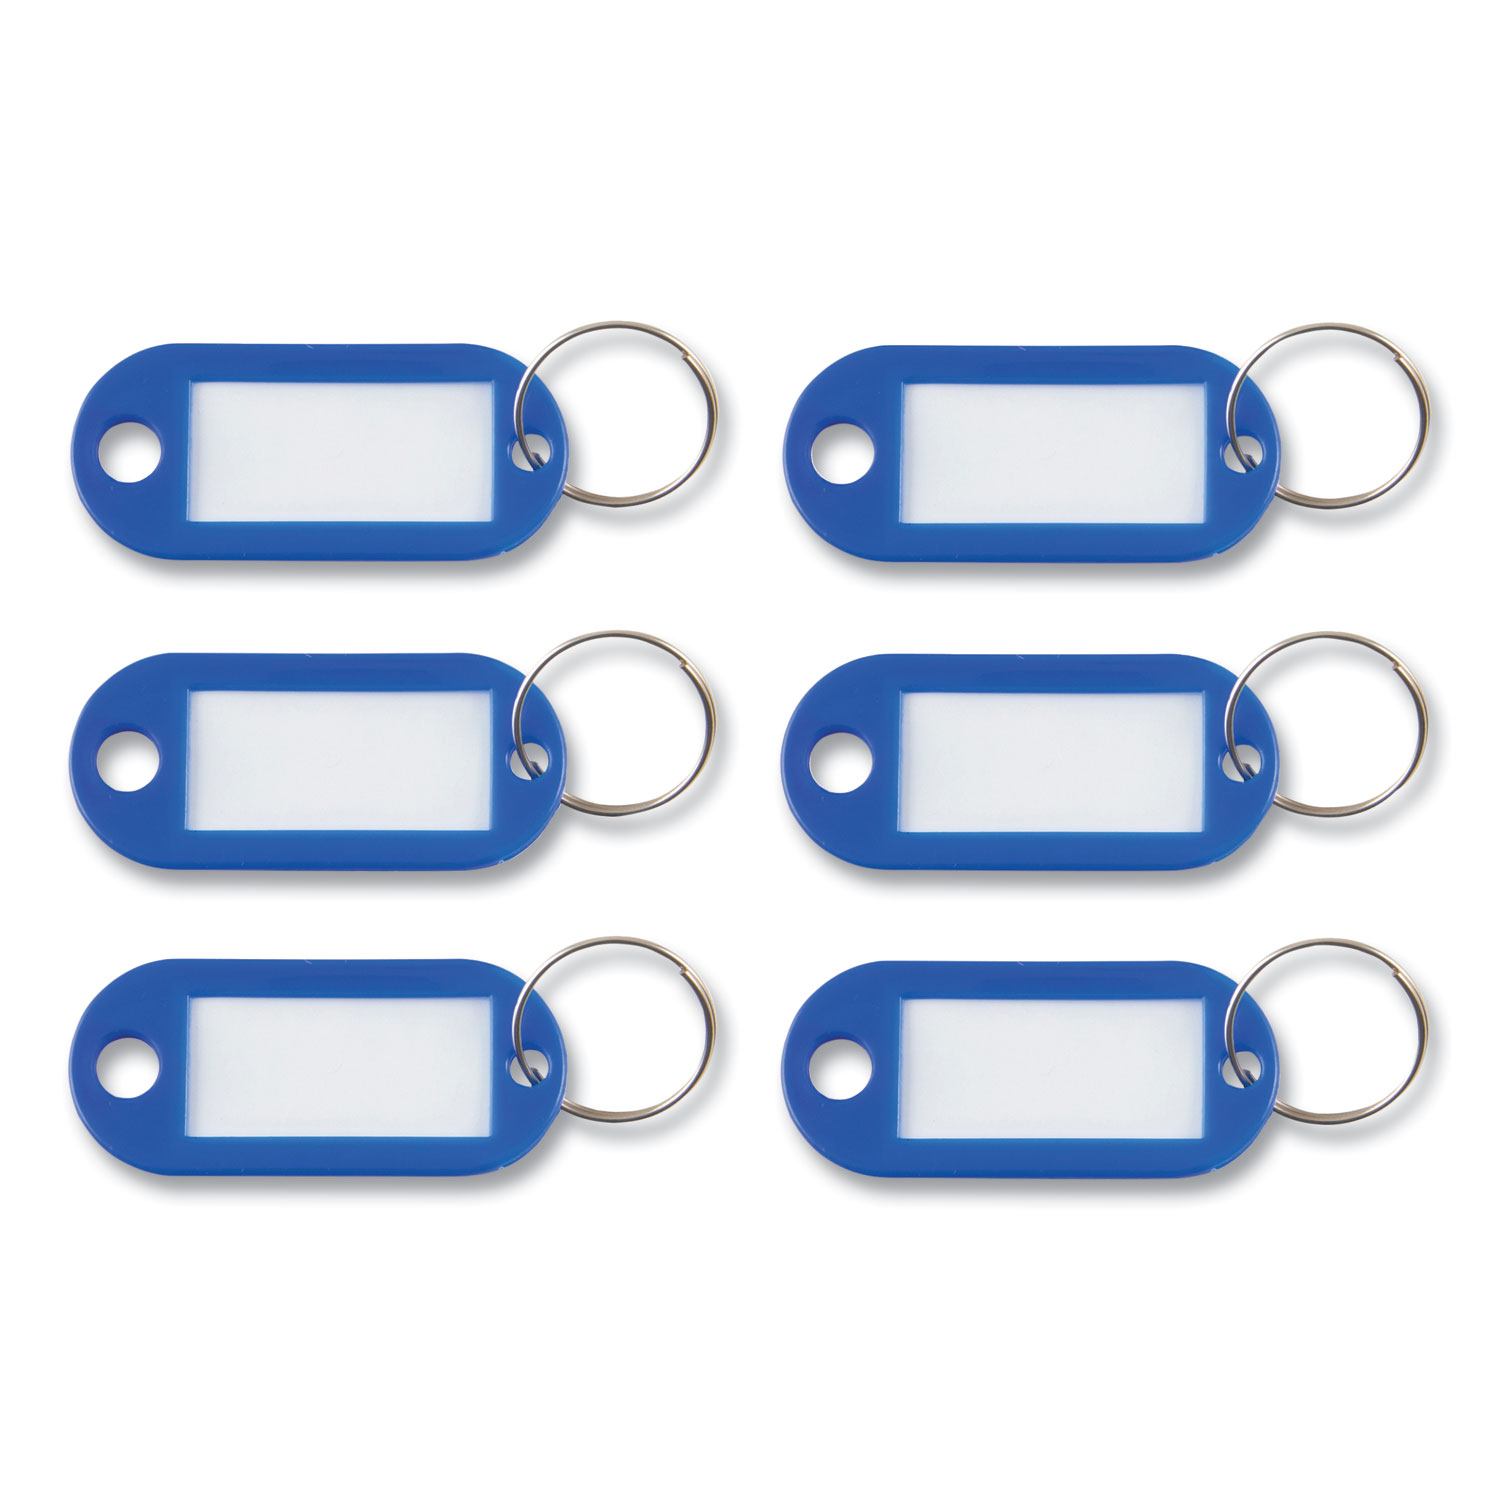 Key Tags, Pack Of 10 Key Tags With Labels Key Fobs Id Plastic Key Tags Key  Labels With Split Rings For Luggage Pet Name Memory Stick Tags-10 Colors